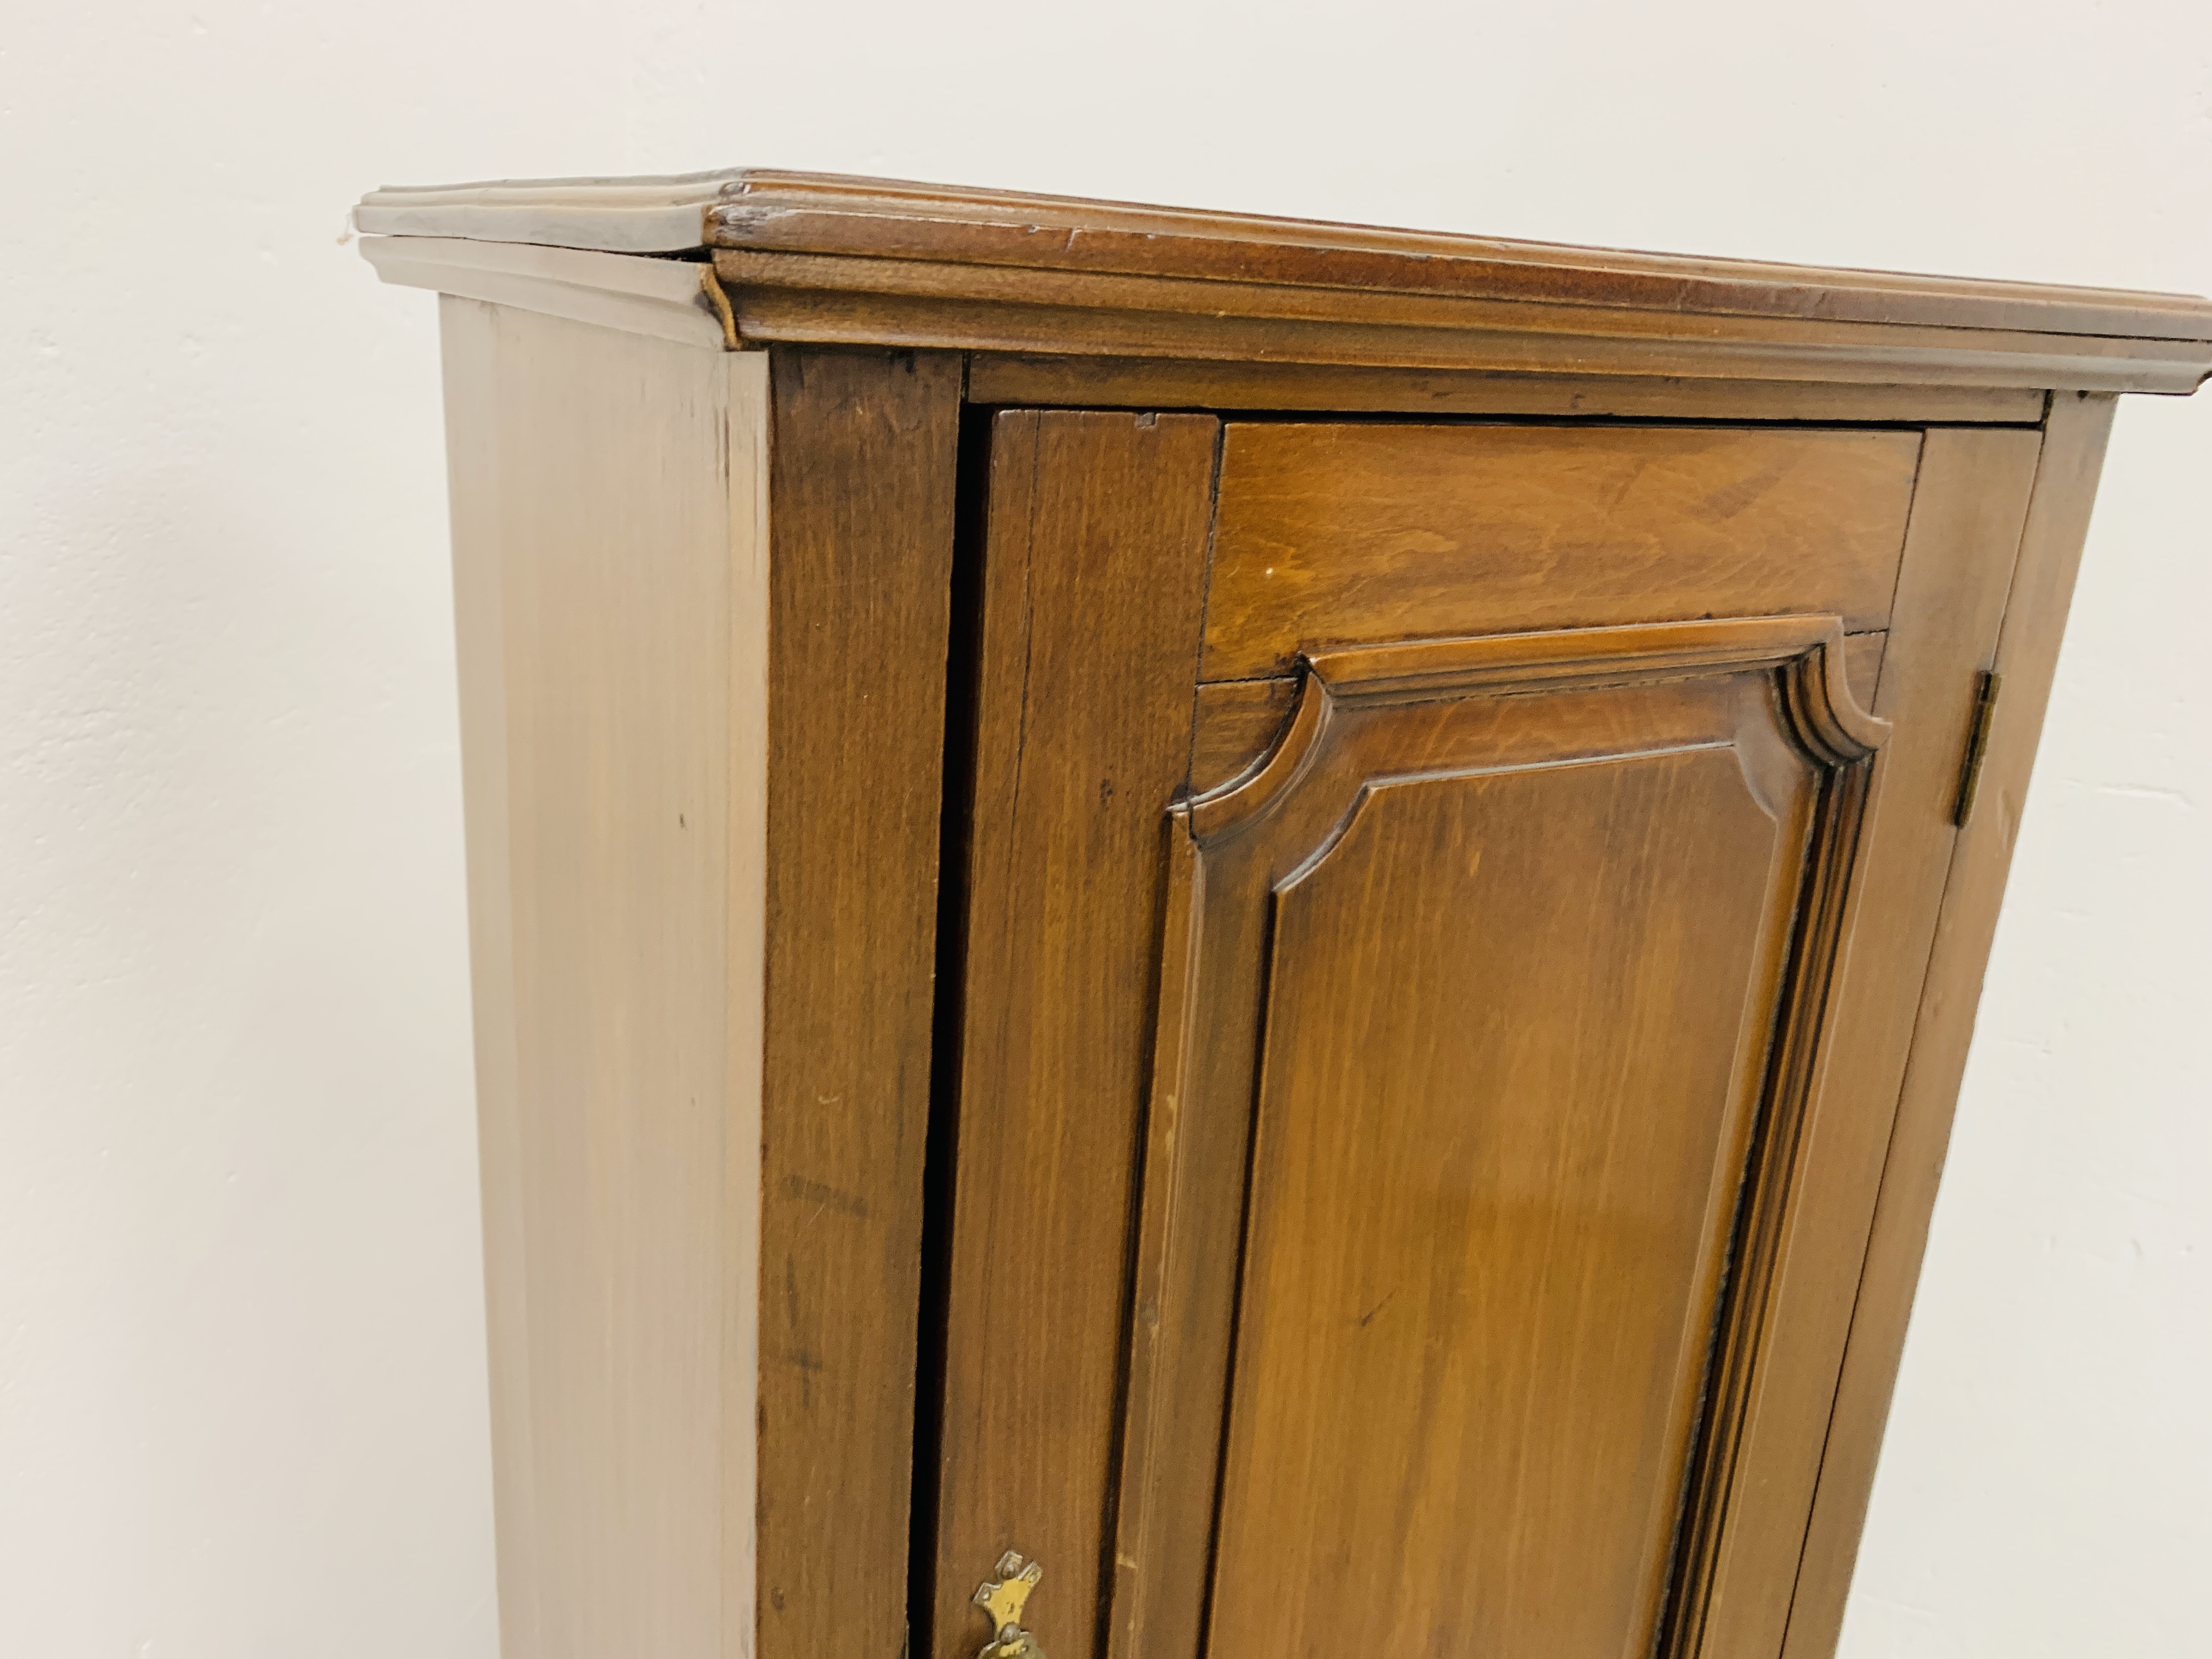 A HARDWOOD CABINET WITH PANEL DOOR AND SHELVED INTERIOR - W 50CM. D 35CM. H 100CM. - Image 5 of 7